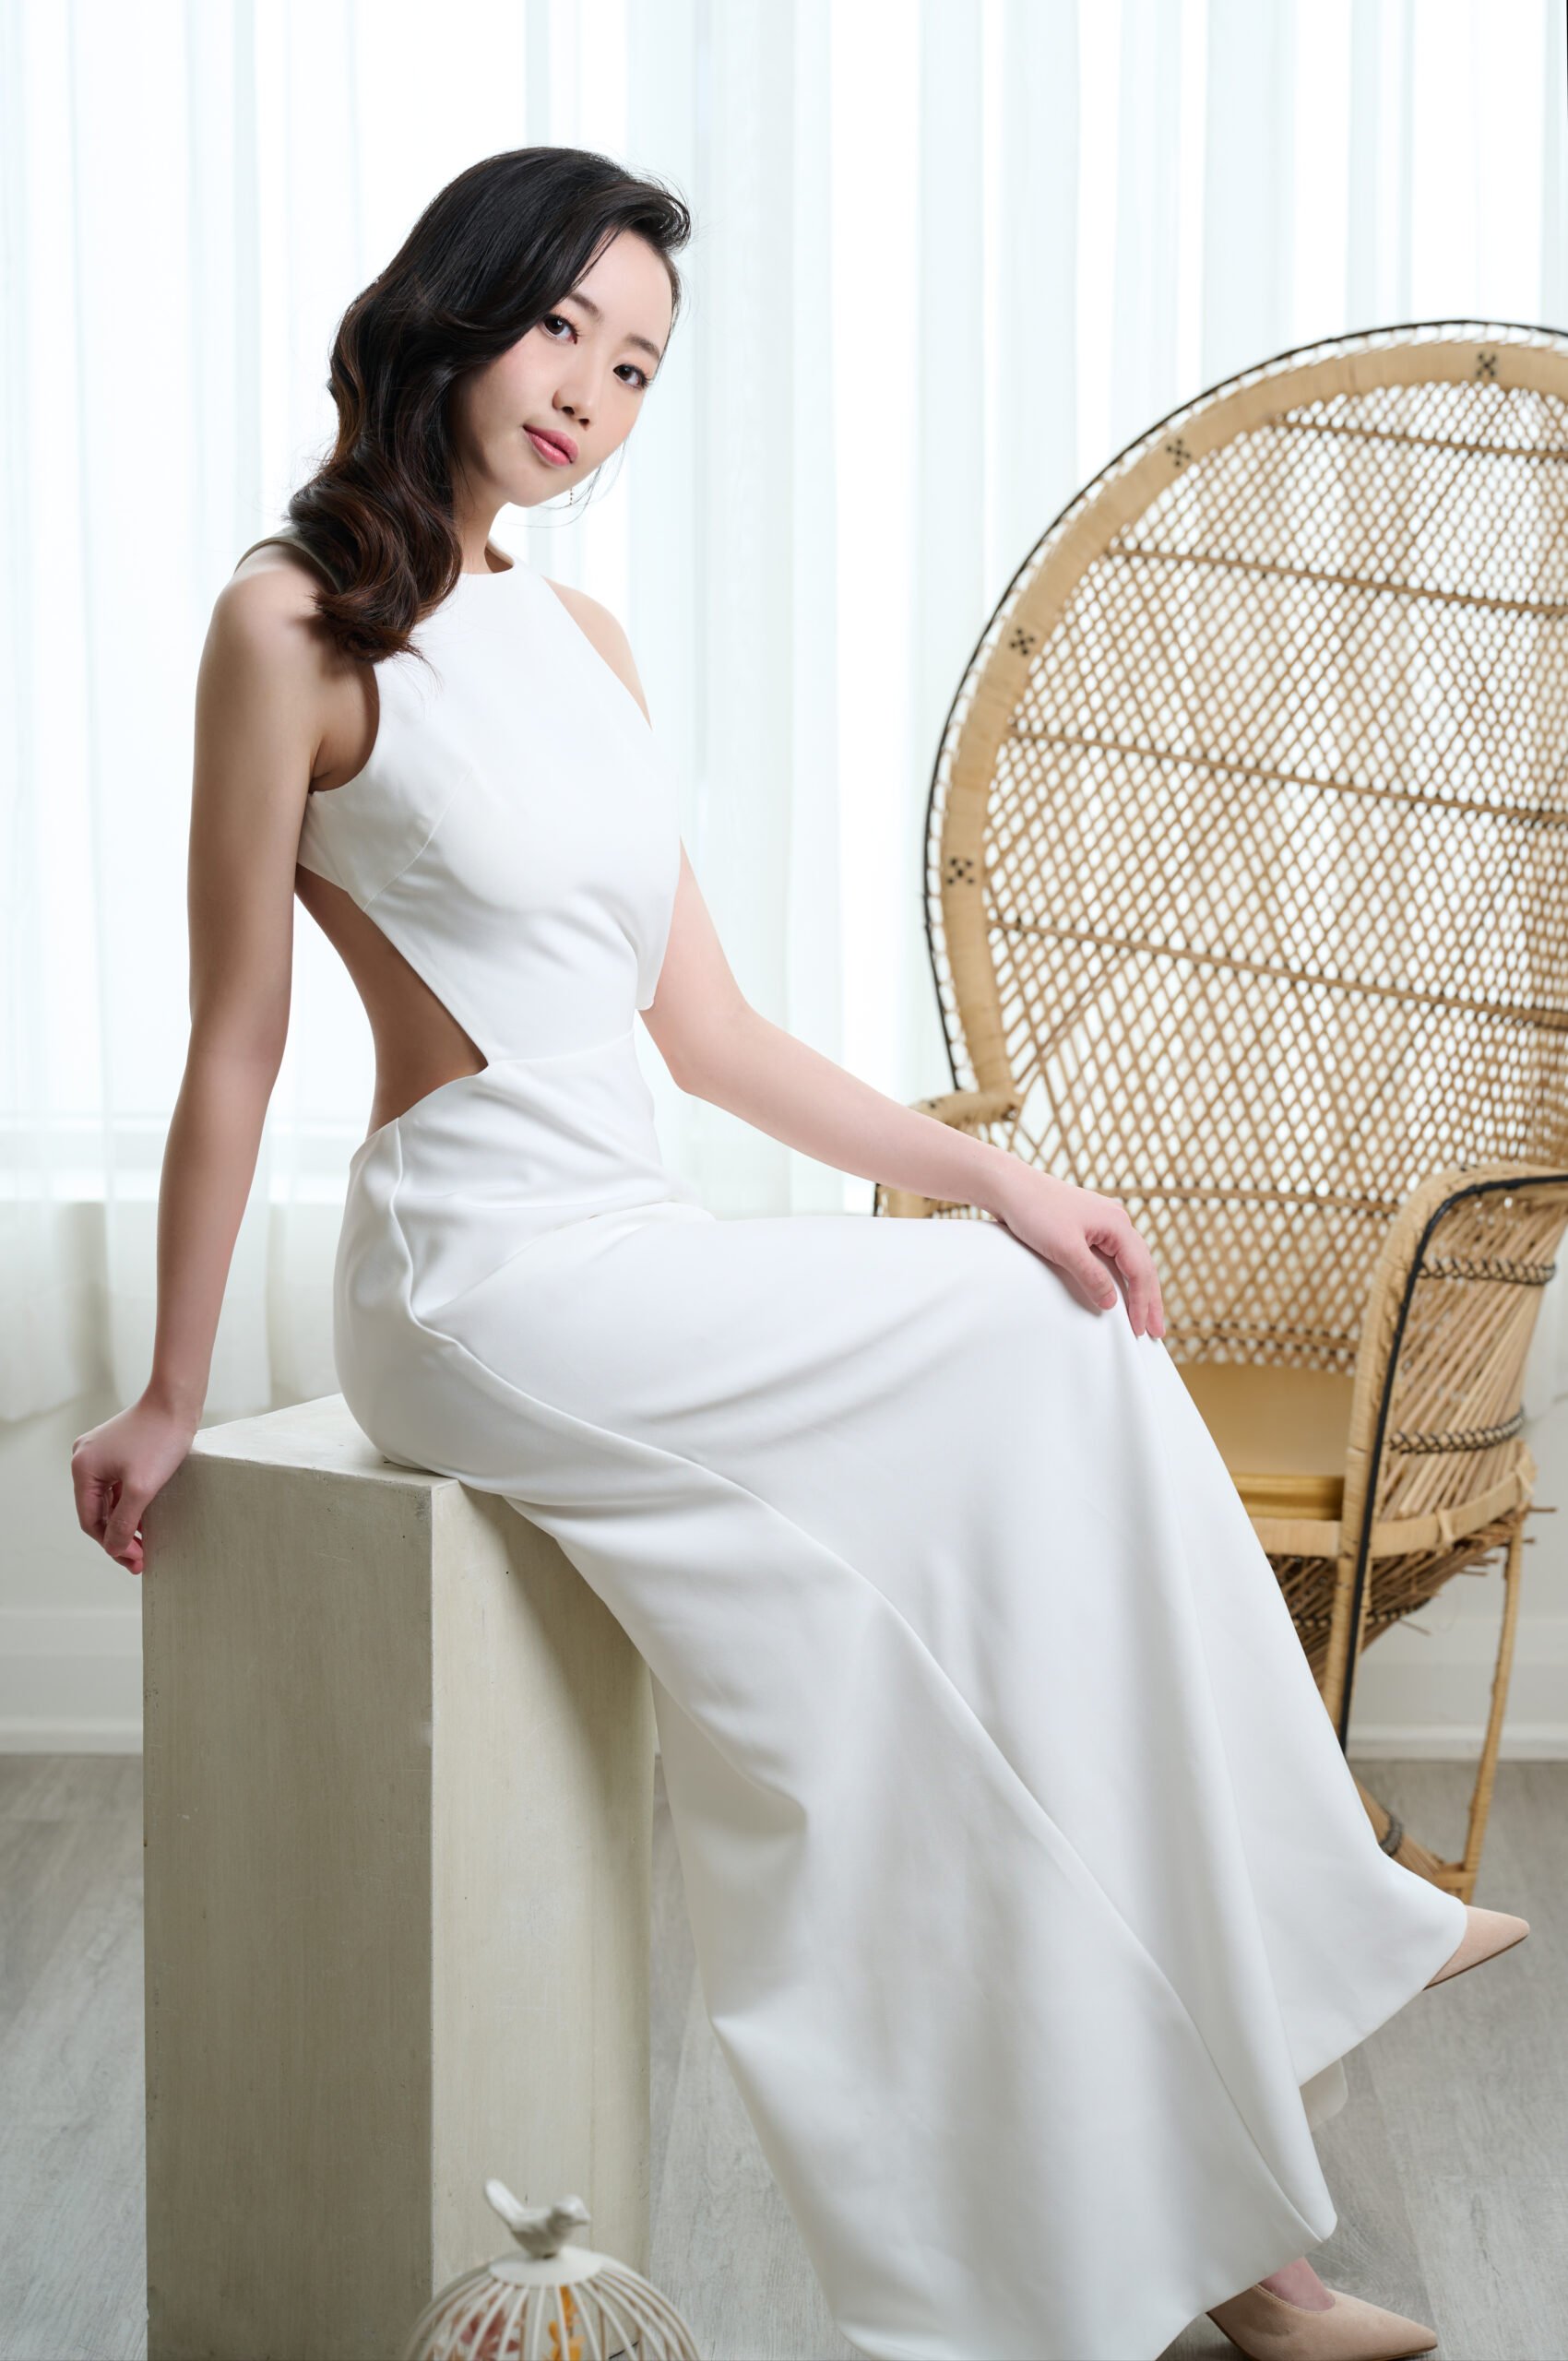 Rent Sara, the modern and sleek wedding dress designed to make you feel confident and beautiful. With a high halter neckline, intricate button back, and daring side cutouts, this gown will turn heads.